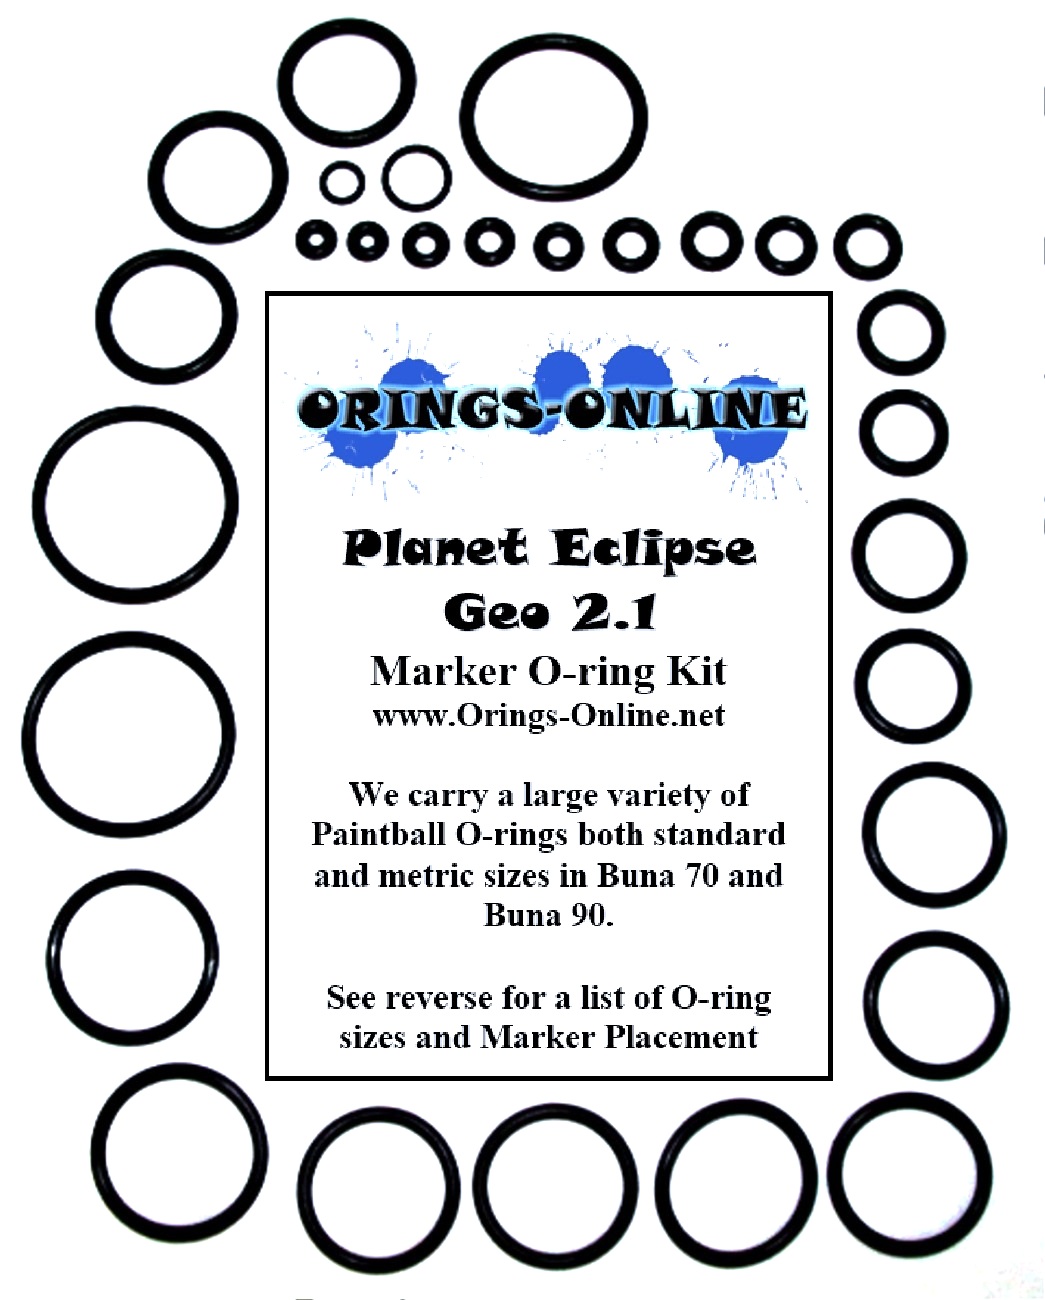 Planet Eclipse Geo 2.1 Marker O-ring Kit